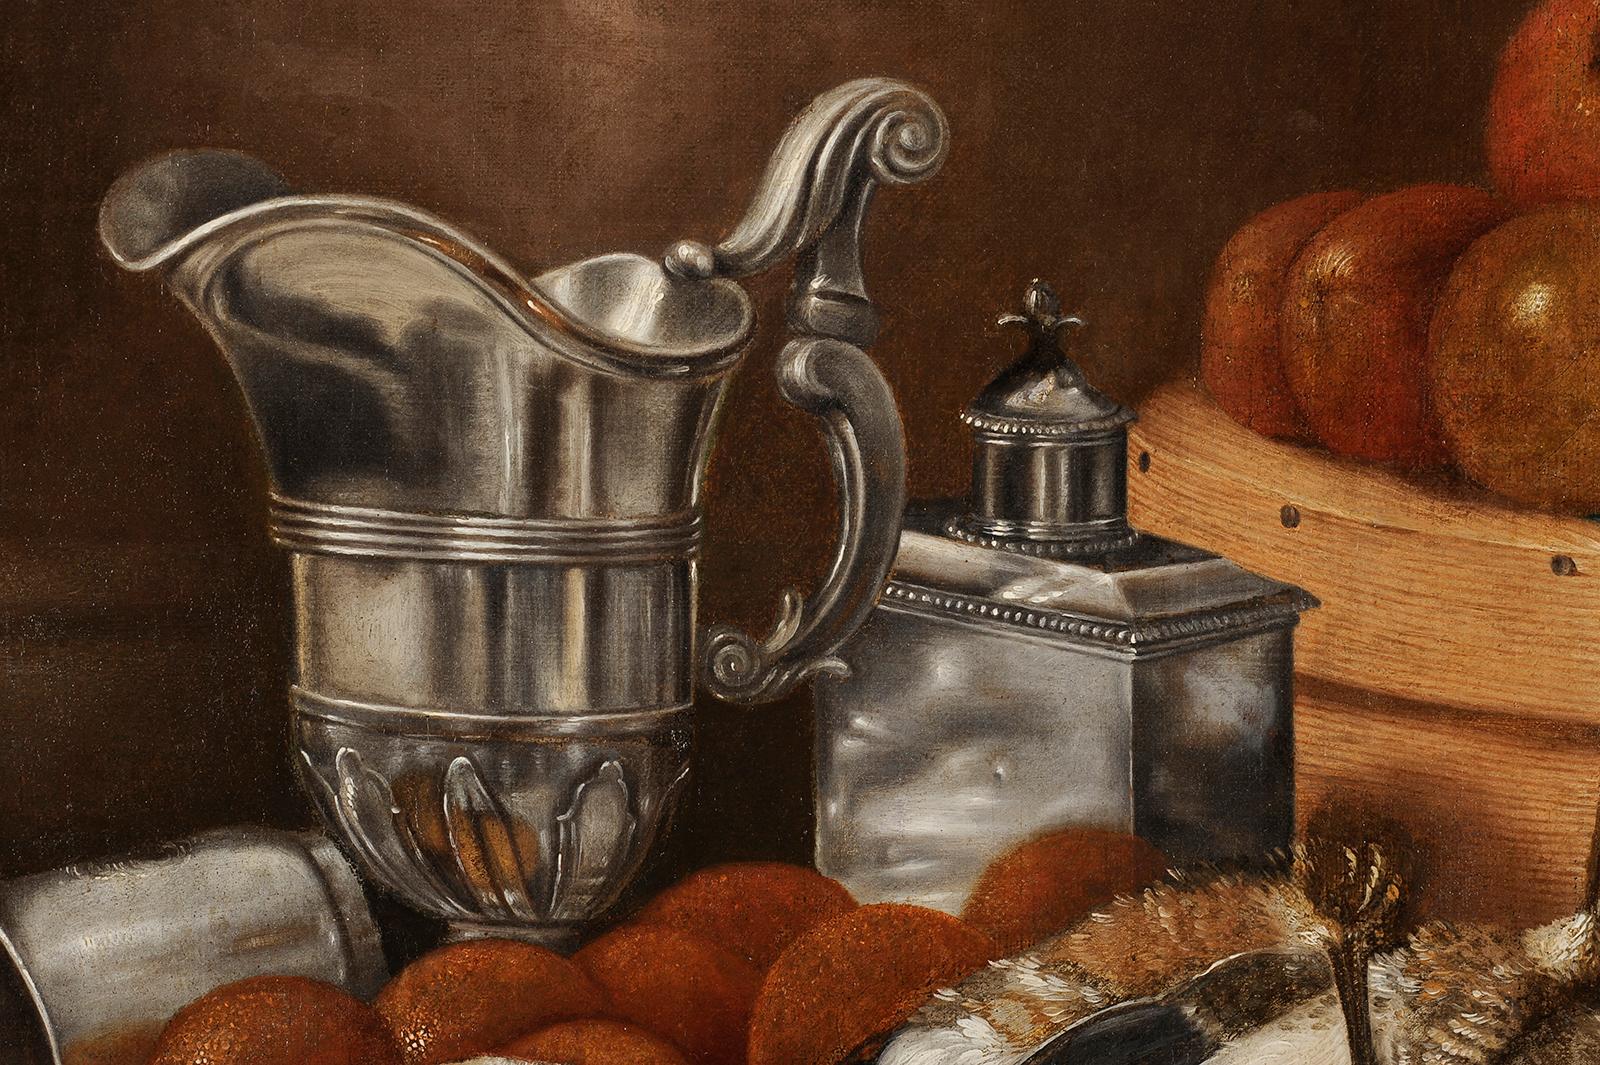 French school circa 1770
Pair of still lifes
Oil on canvas
H. 65 cm; L. 81 cm each

These two works produced during the second half of the 18th century in France have come down to us as a pair. During the 20th century, an amateur exhibited them in